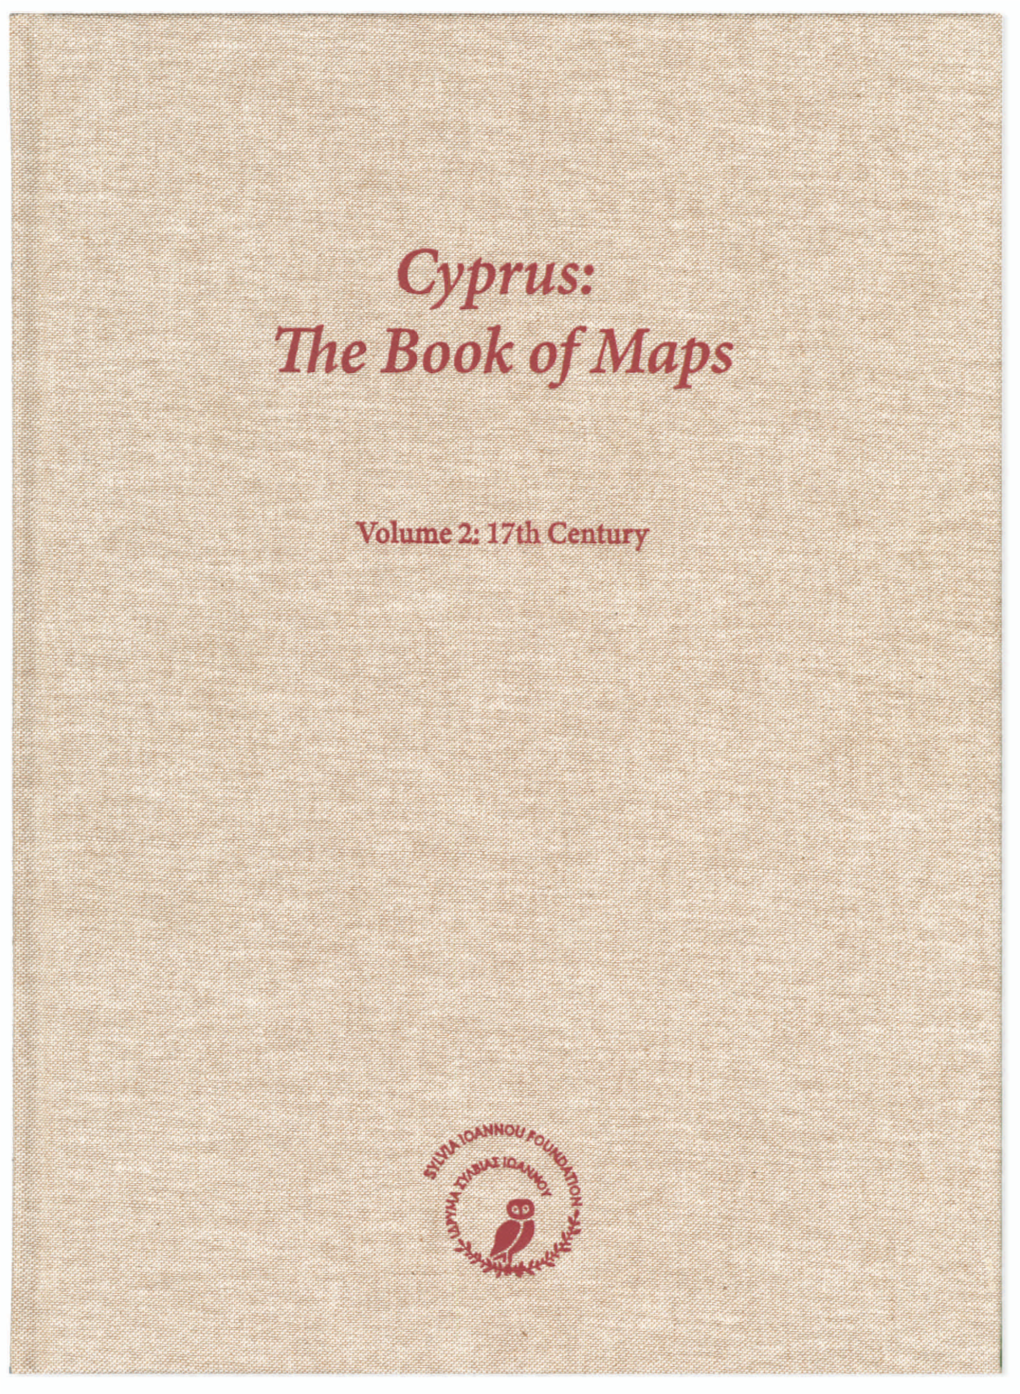 The Book of Maps